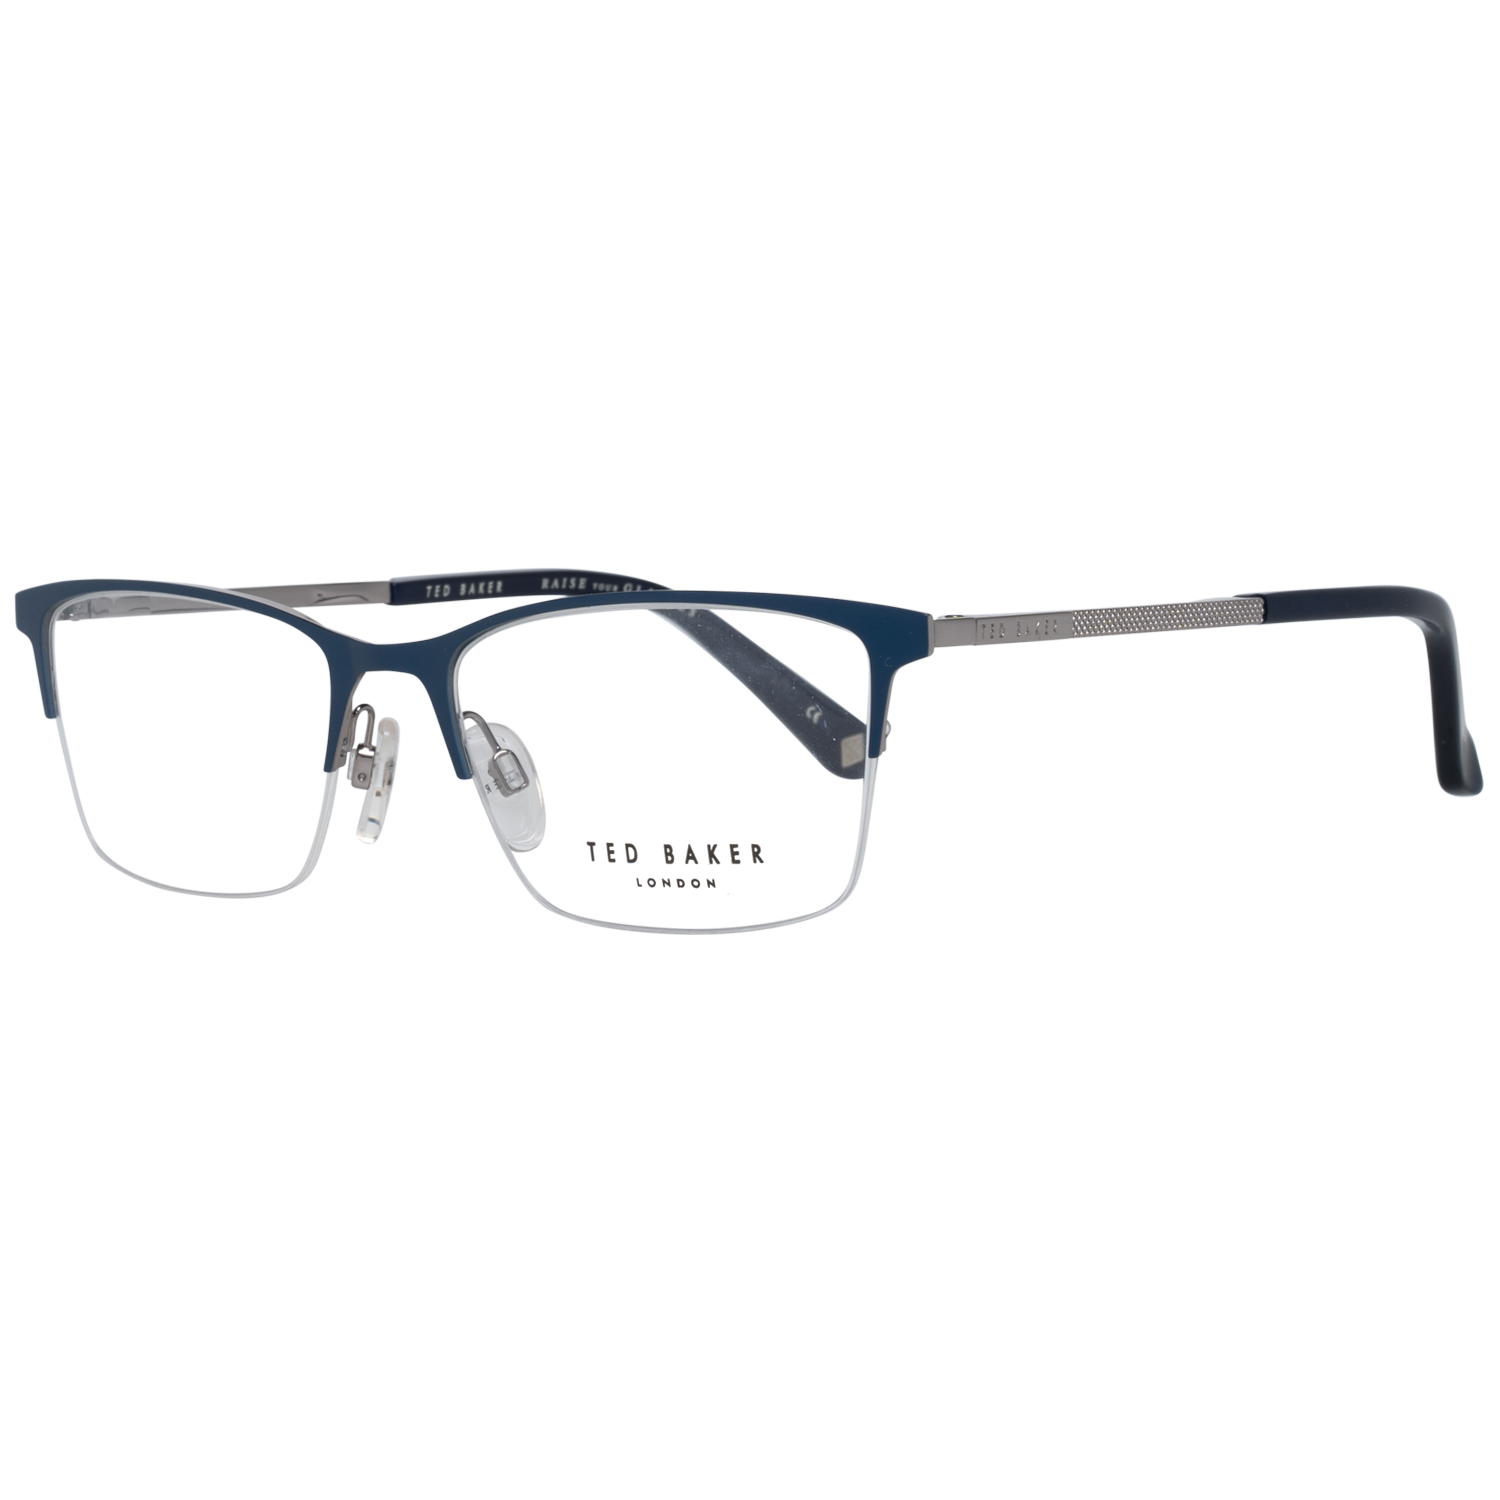 GenderMenMain colorBlueFrame colorBlueFrame materialMetalSize52-17-145Lenses width52mmLenses heigth35mmBridge length17mmFrame width134mmTemple length145mmShipment includesCase, Cleaning clothStyleHalf-RimSpring hingeYes